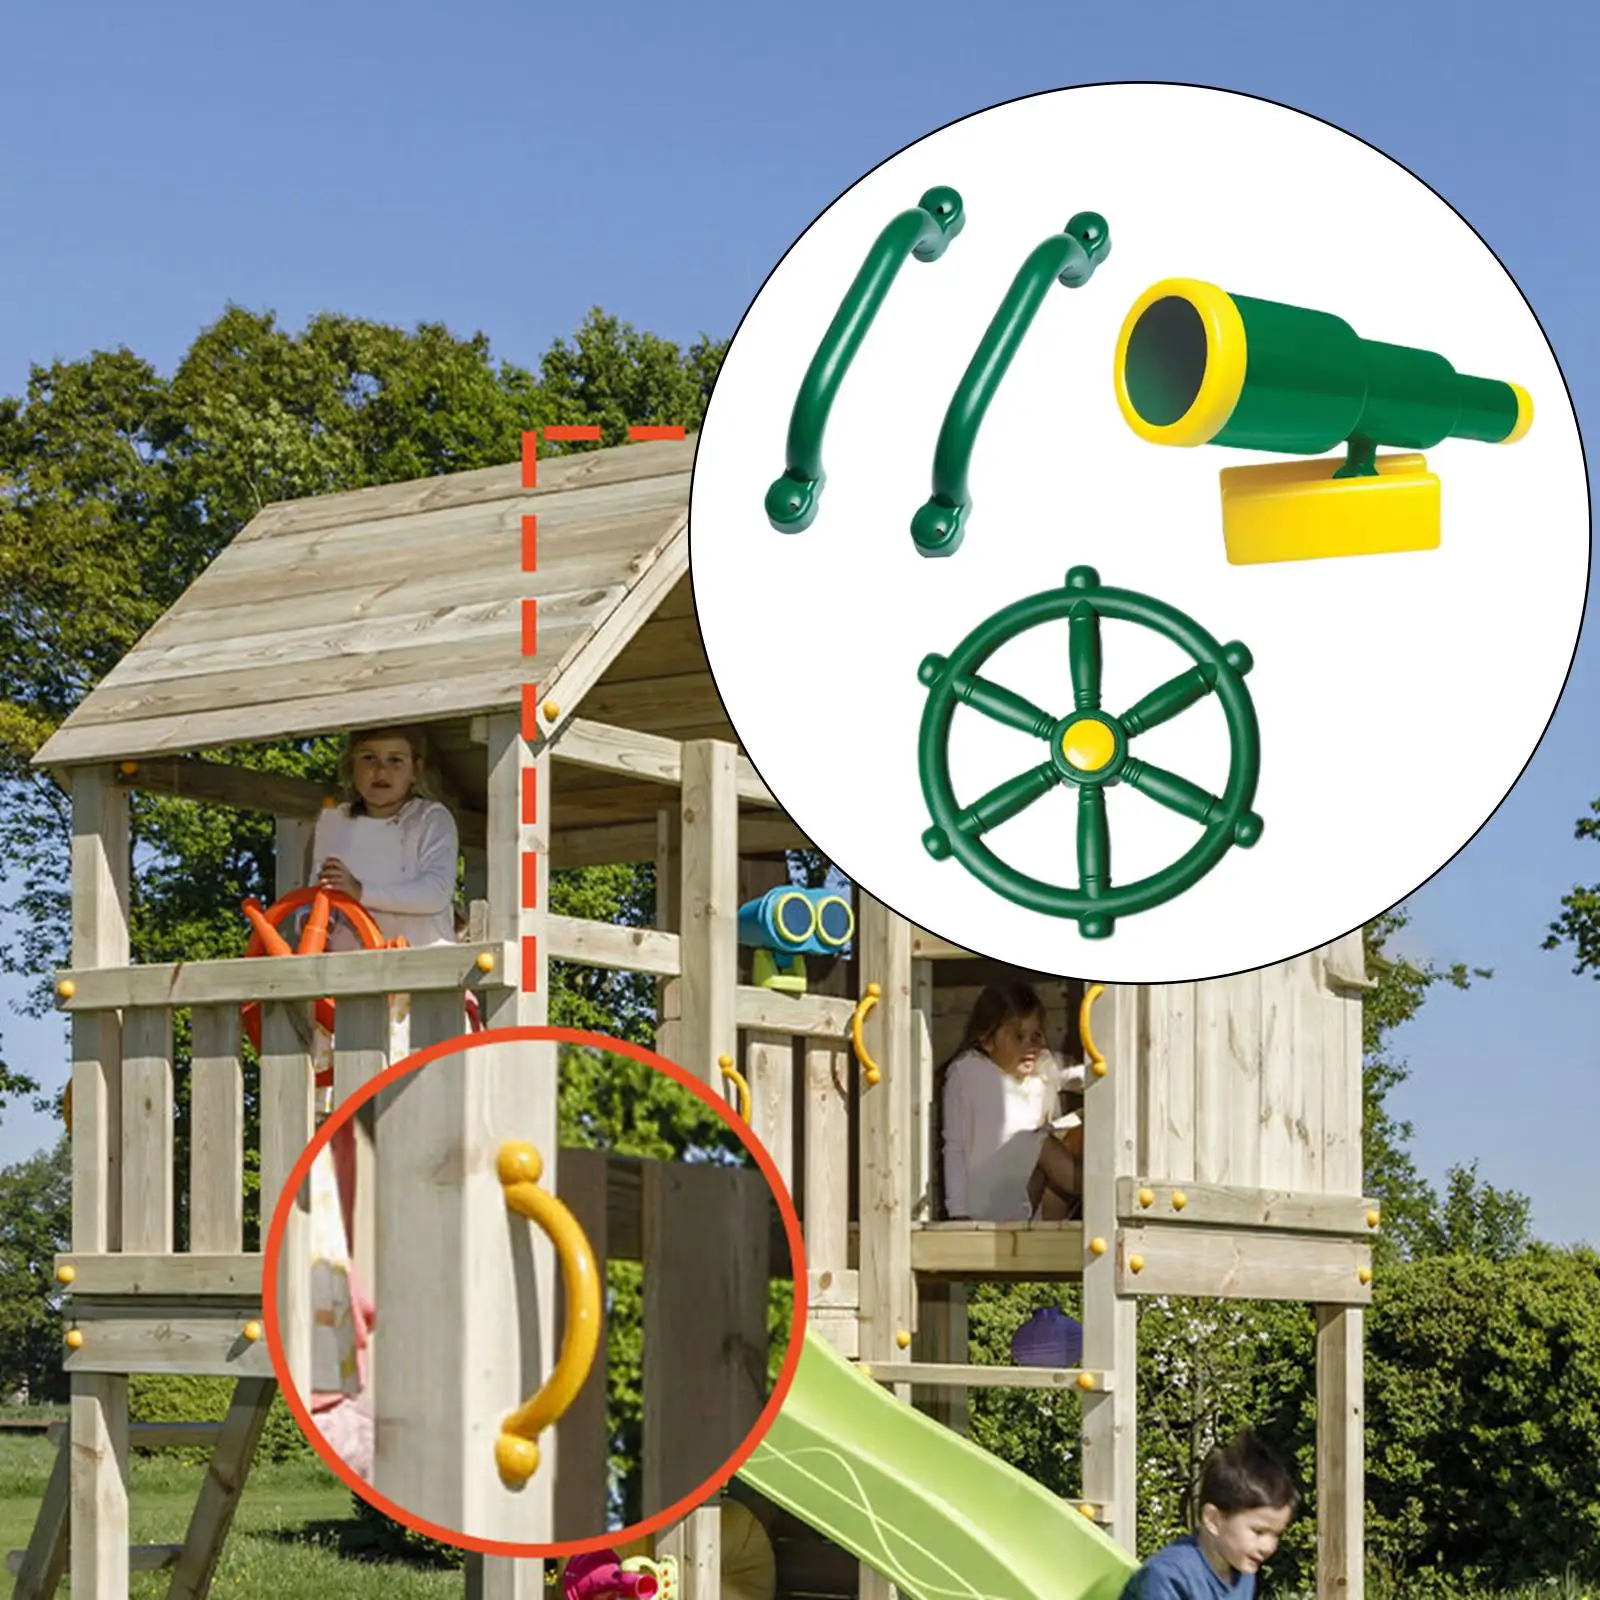 4 Pieces Playground Equipment Set Swing Set Accessories for Jungle Gym